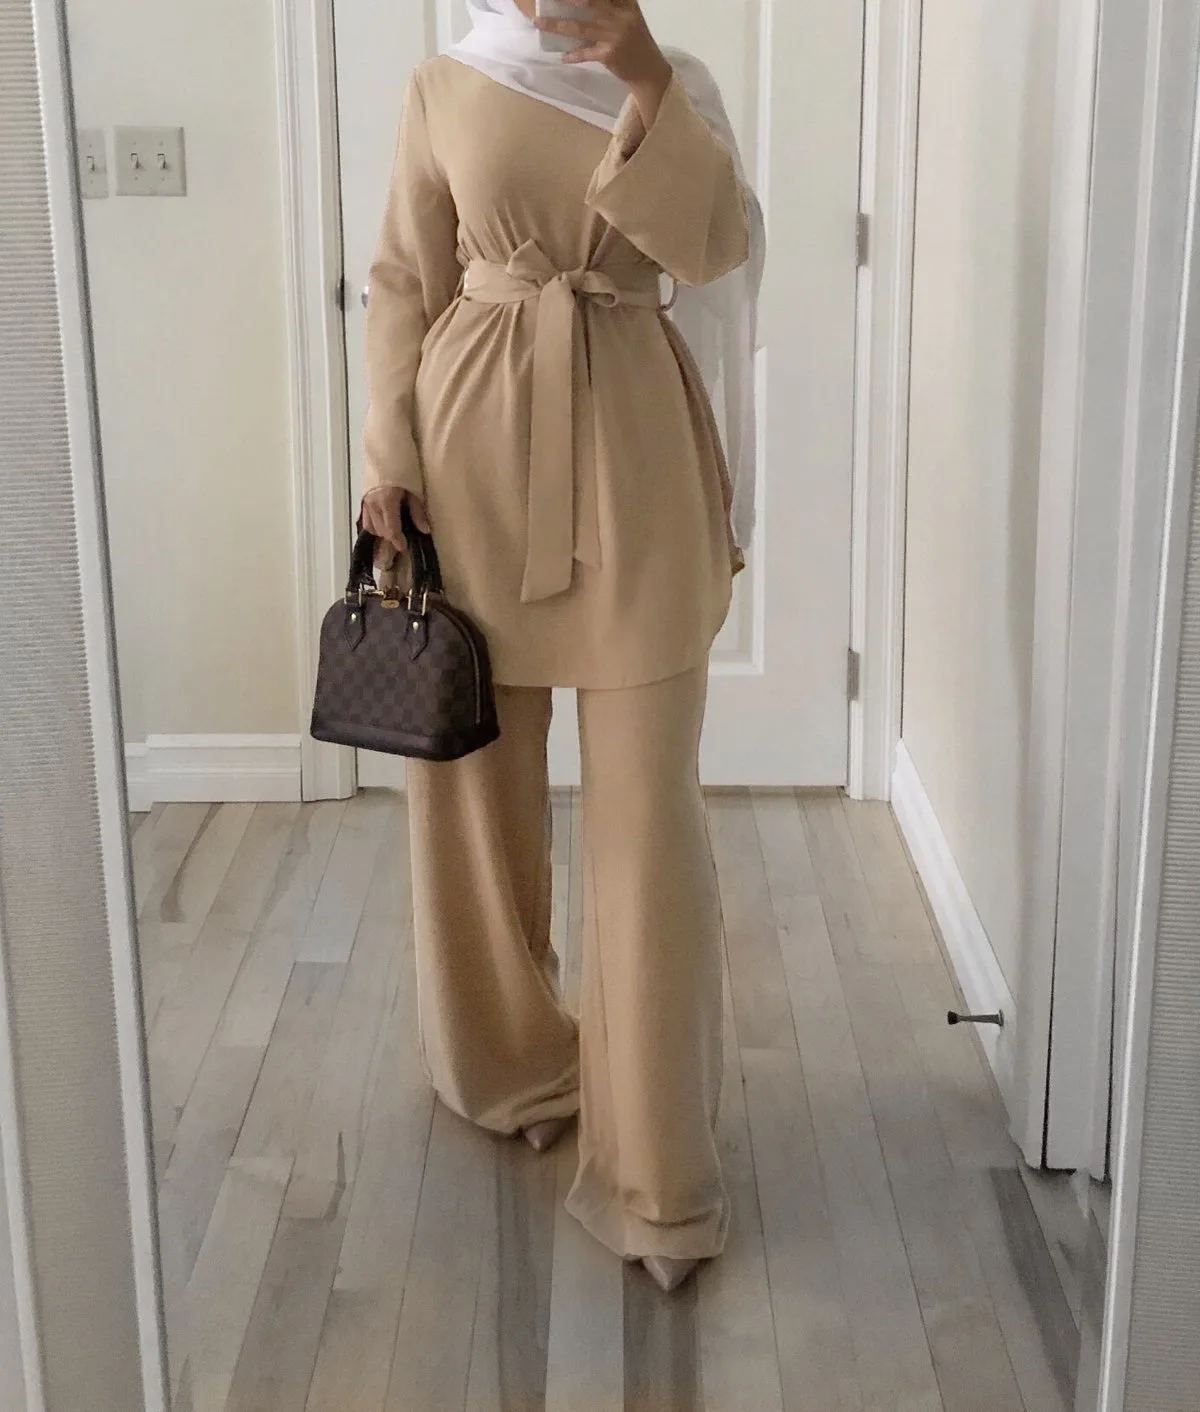 

Women Modest Islamic Clothing Pleats Candy Color Palazzo Style Wide Leg Pants Two Piece Suit, According to the picture